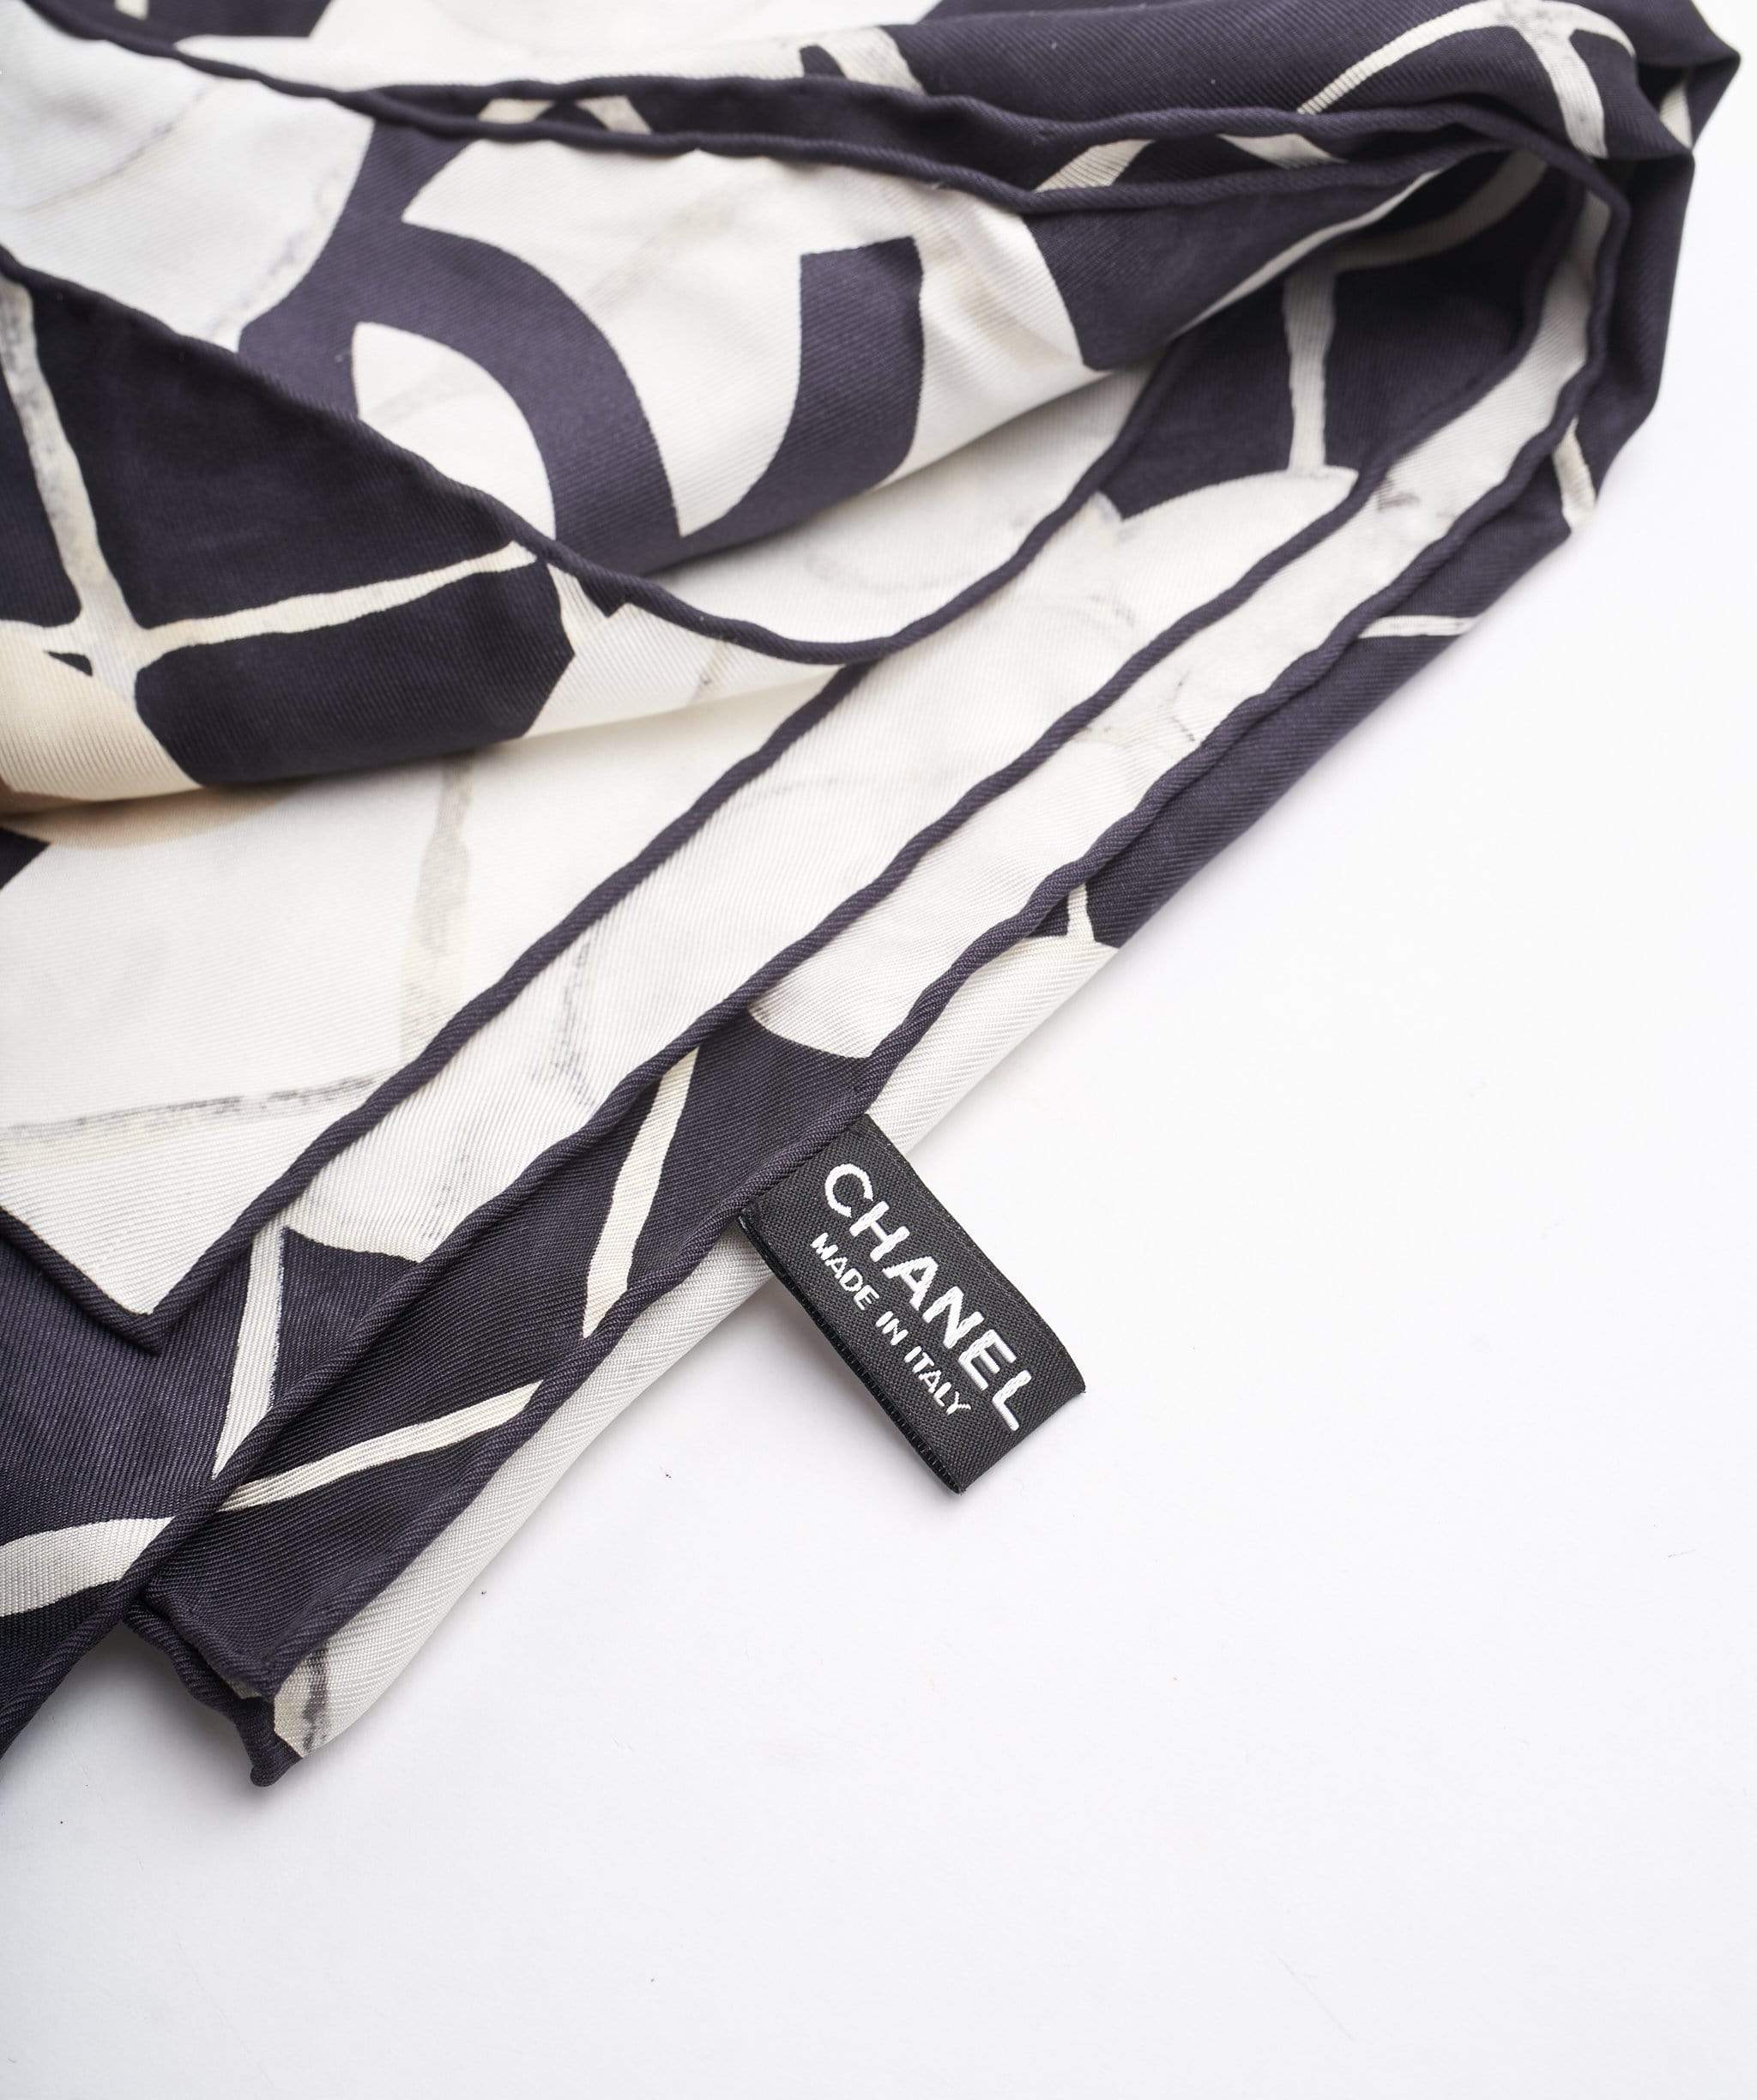 Chanel Chanel silk scarf black and white